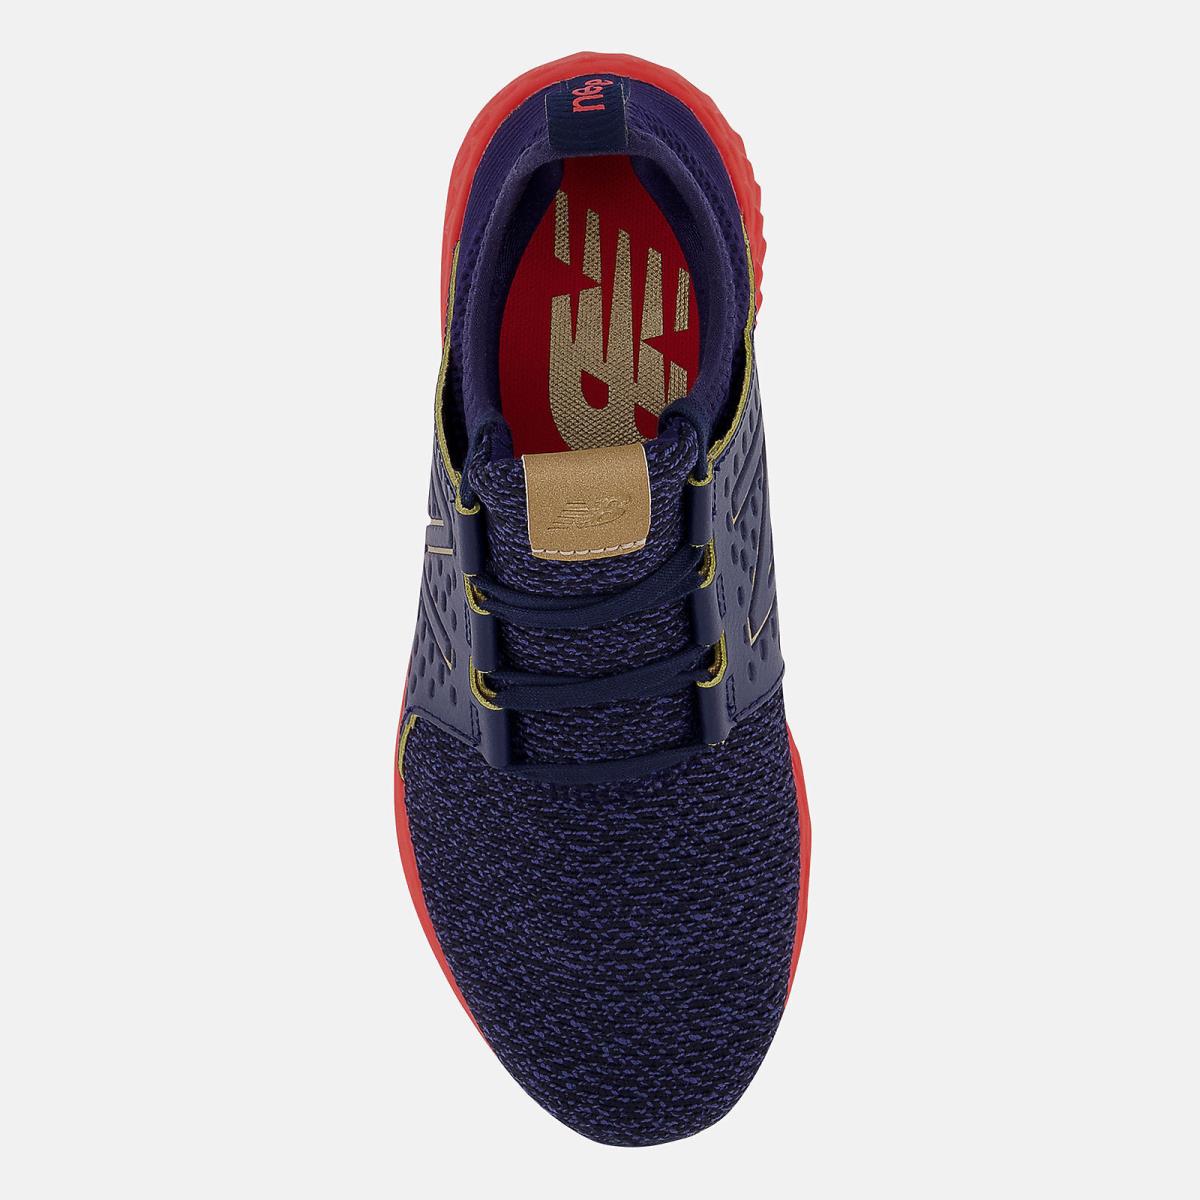 New Balance shoes  - Team Navy Neo Flame 2